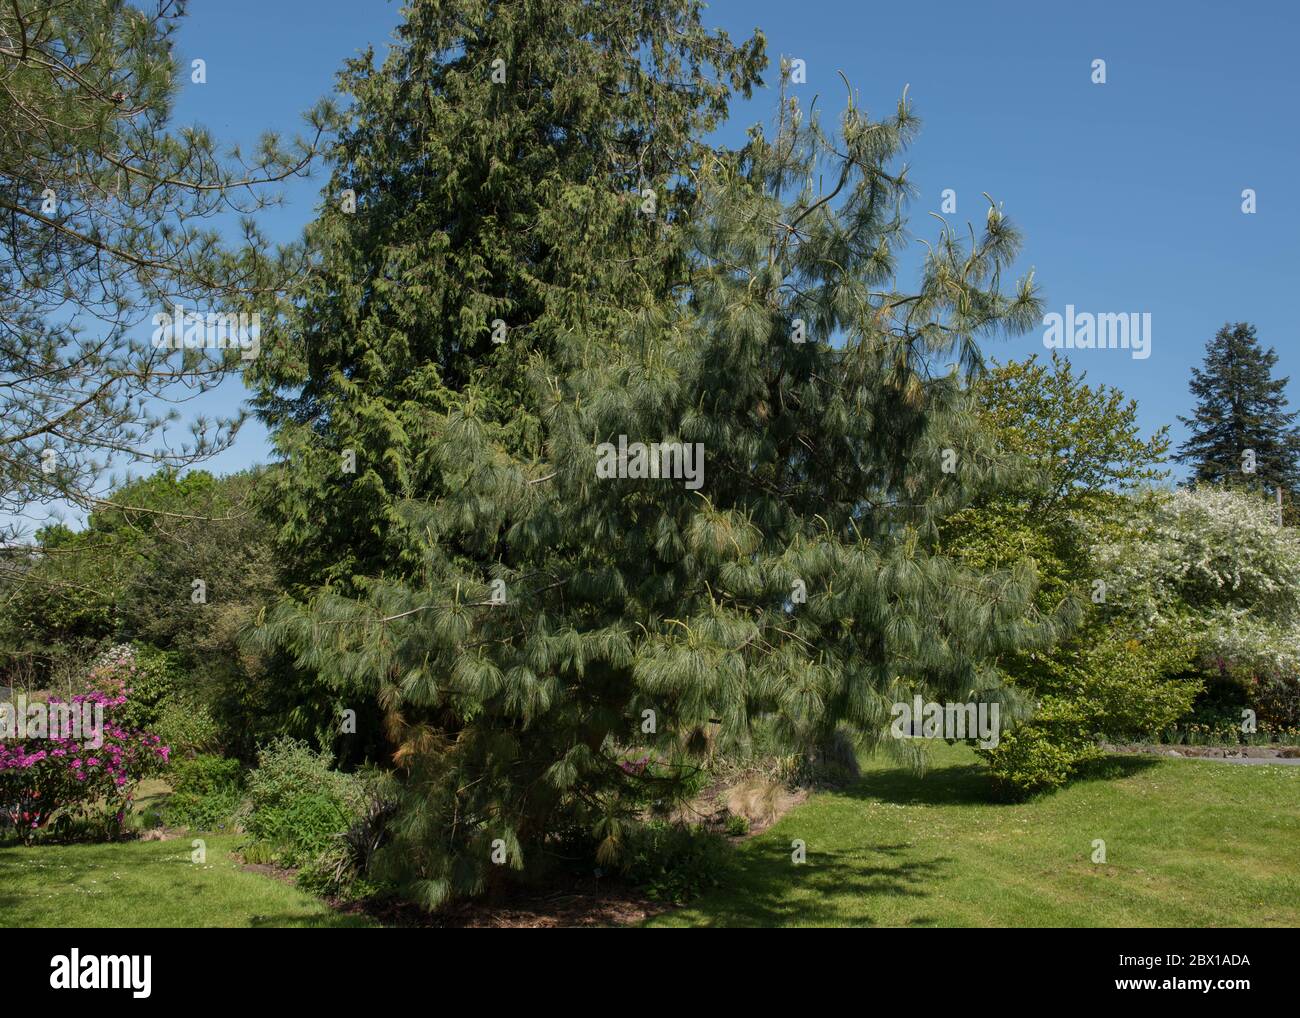 Green Foliage of an Evergreen Coniferous Armand or Chinese White Pine Tree (Pinus armandii) Growing in a Garden in Rural England, UK Stock Photo